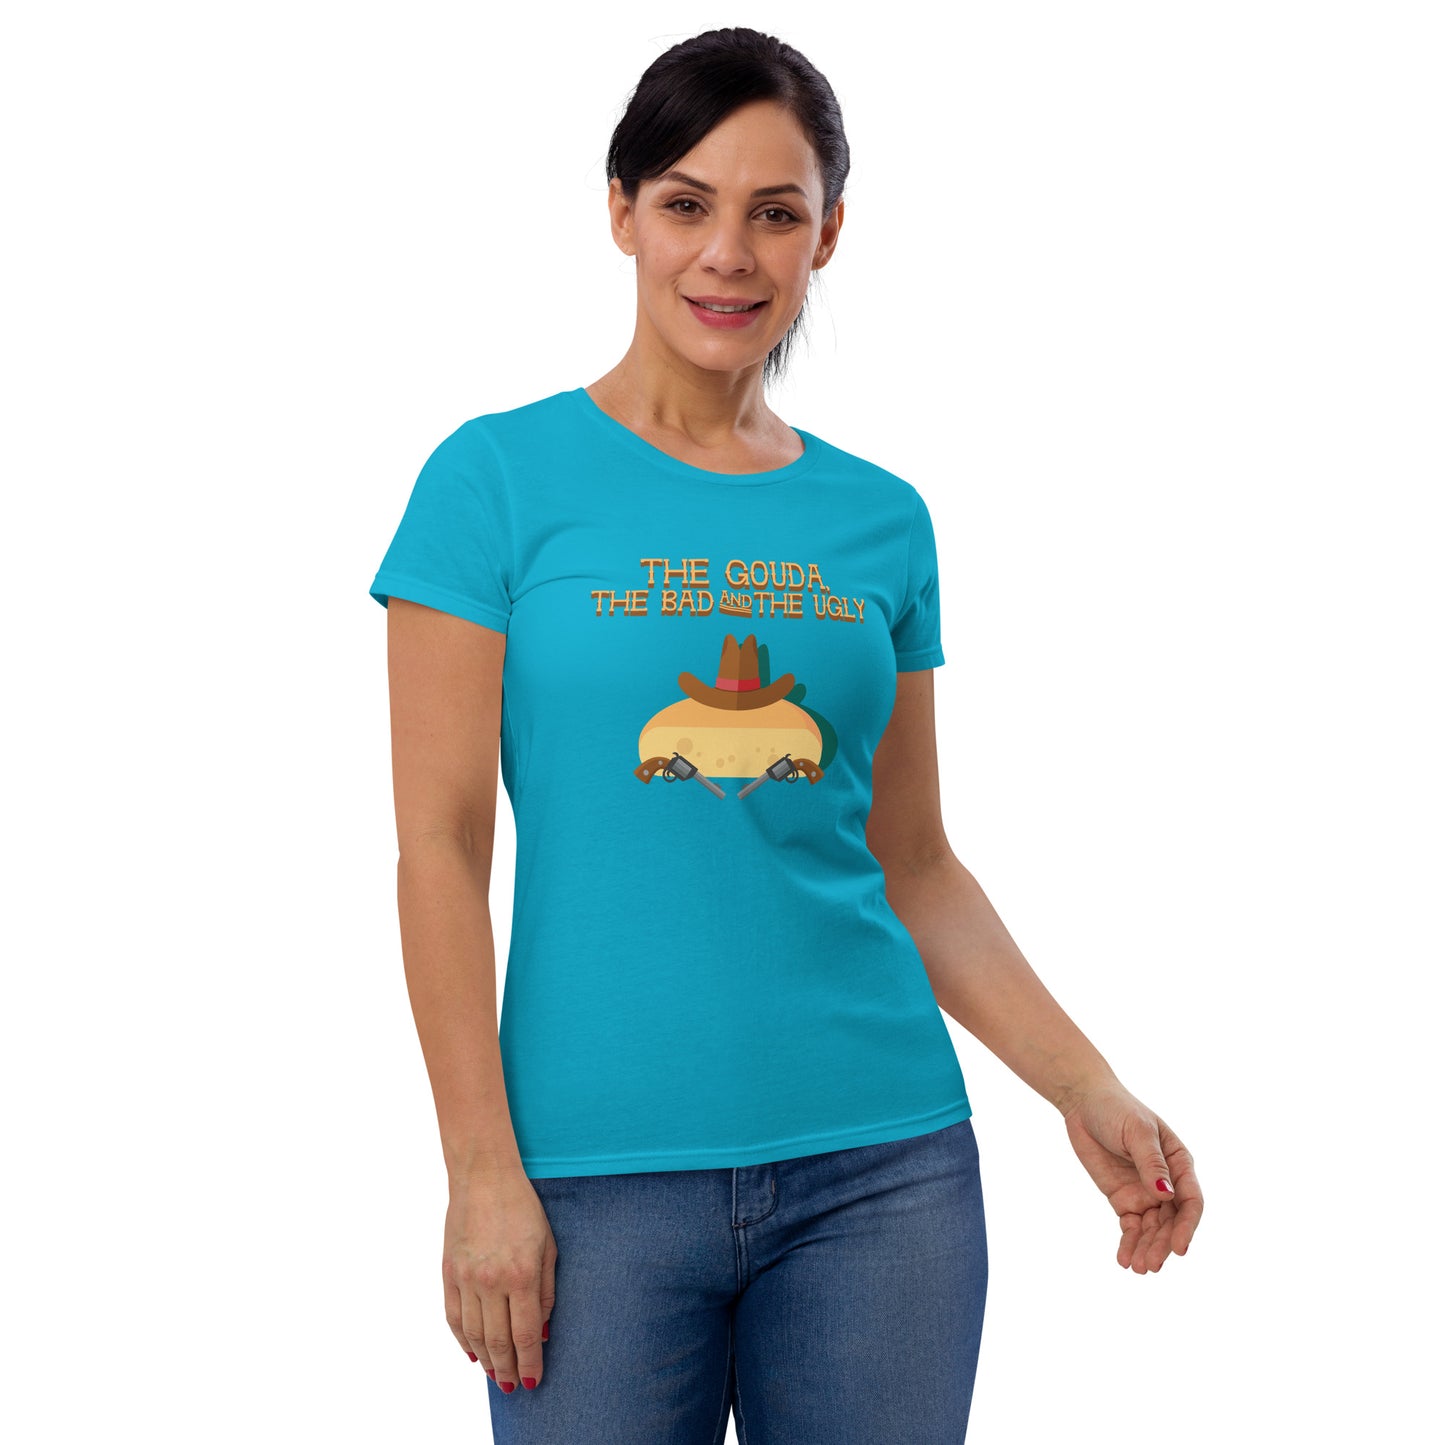 Movie The Food - The Gouda, The Bad, The Ugly Women's T-Shirt - Caribbean Blue - Model Front